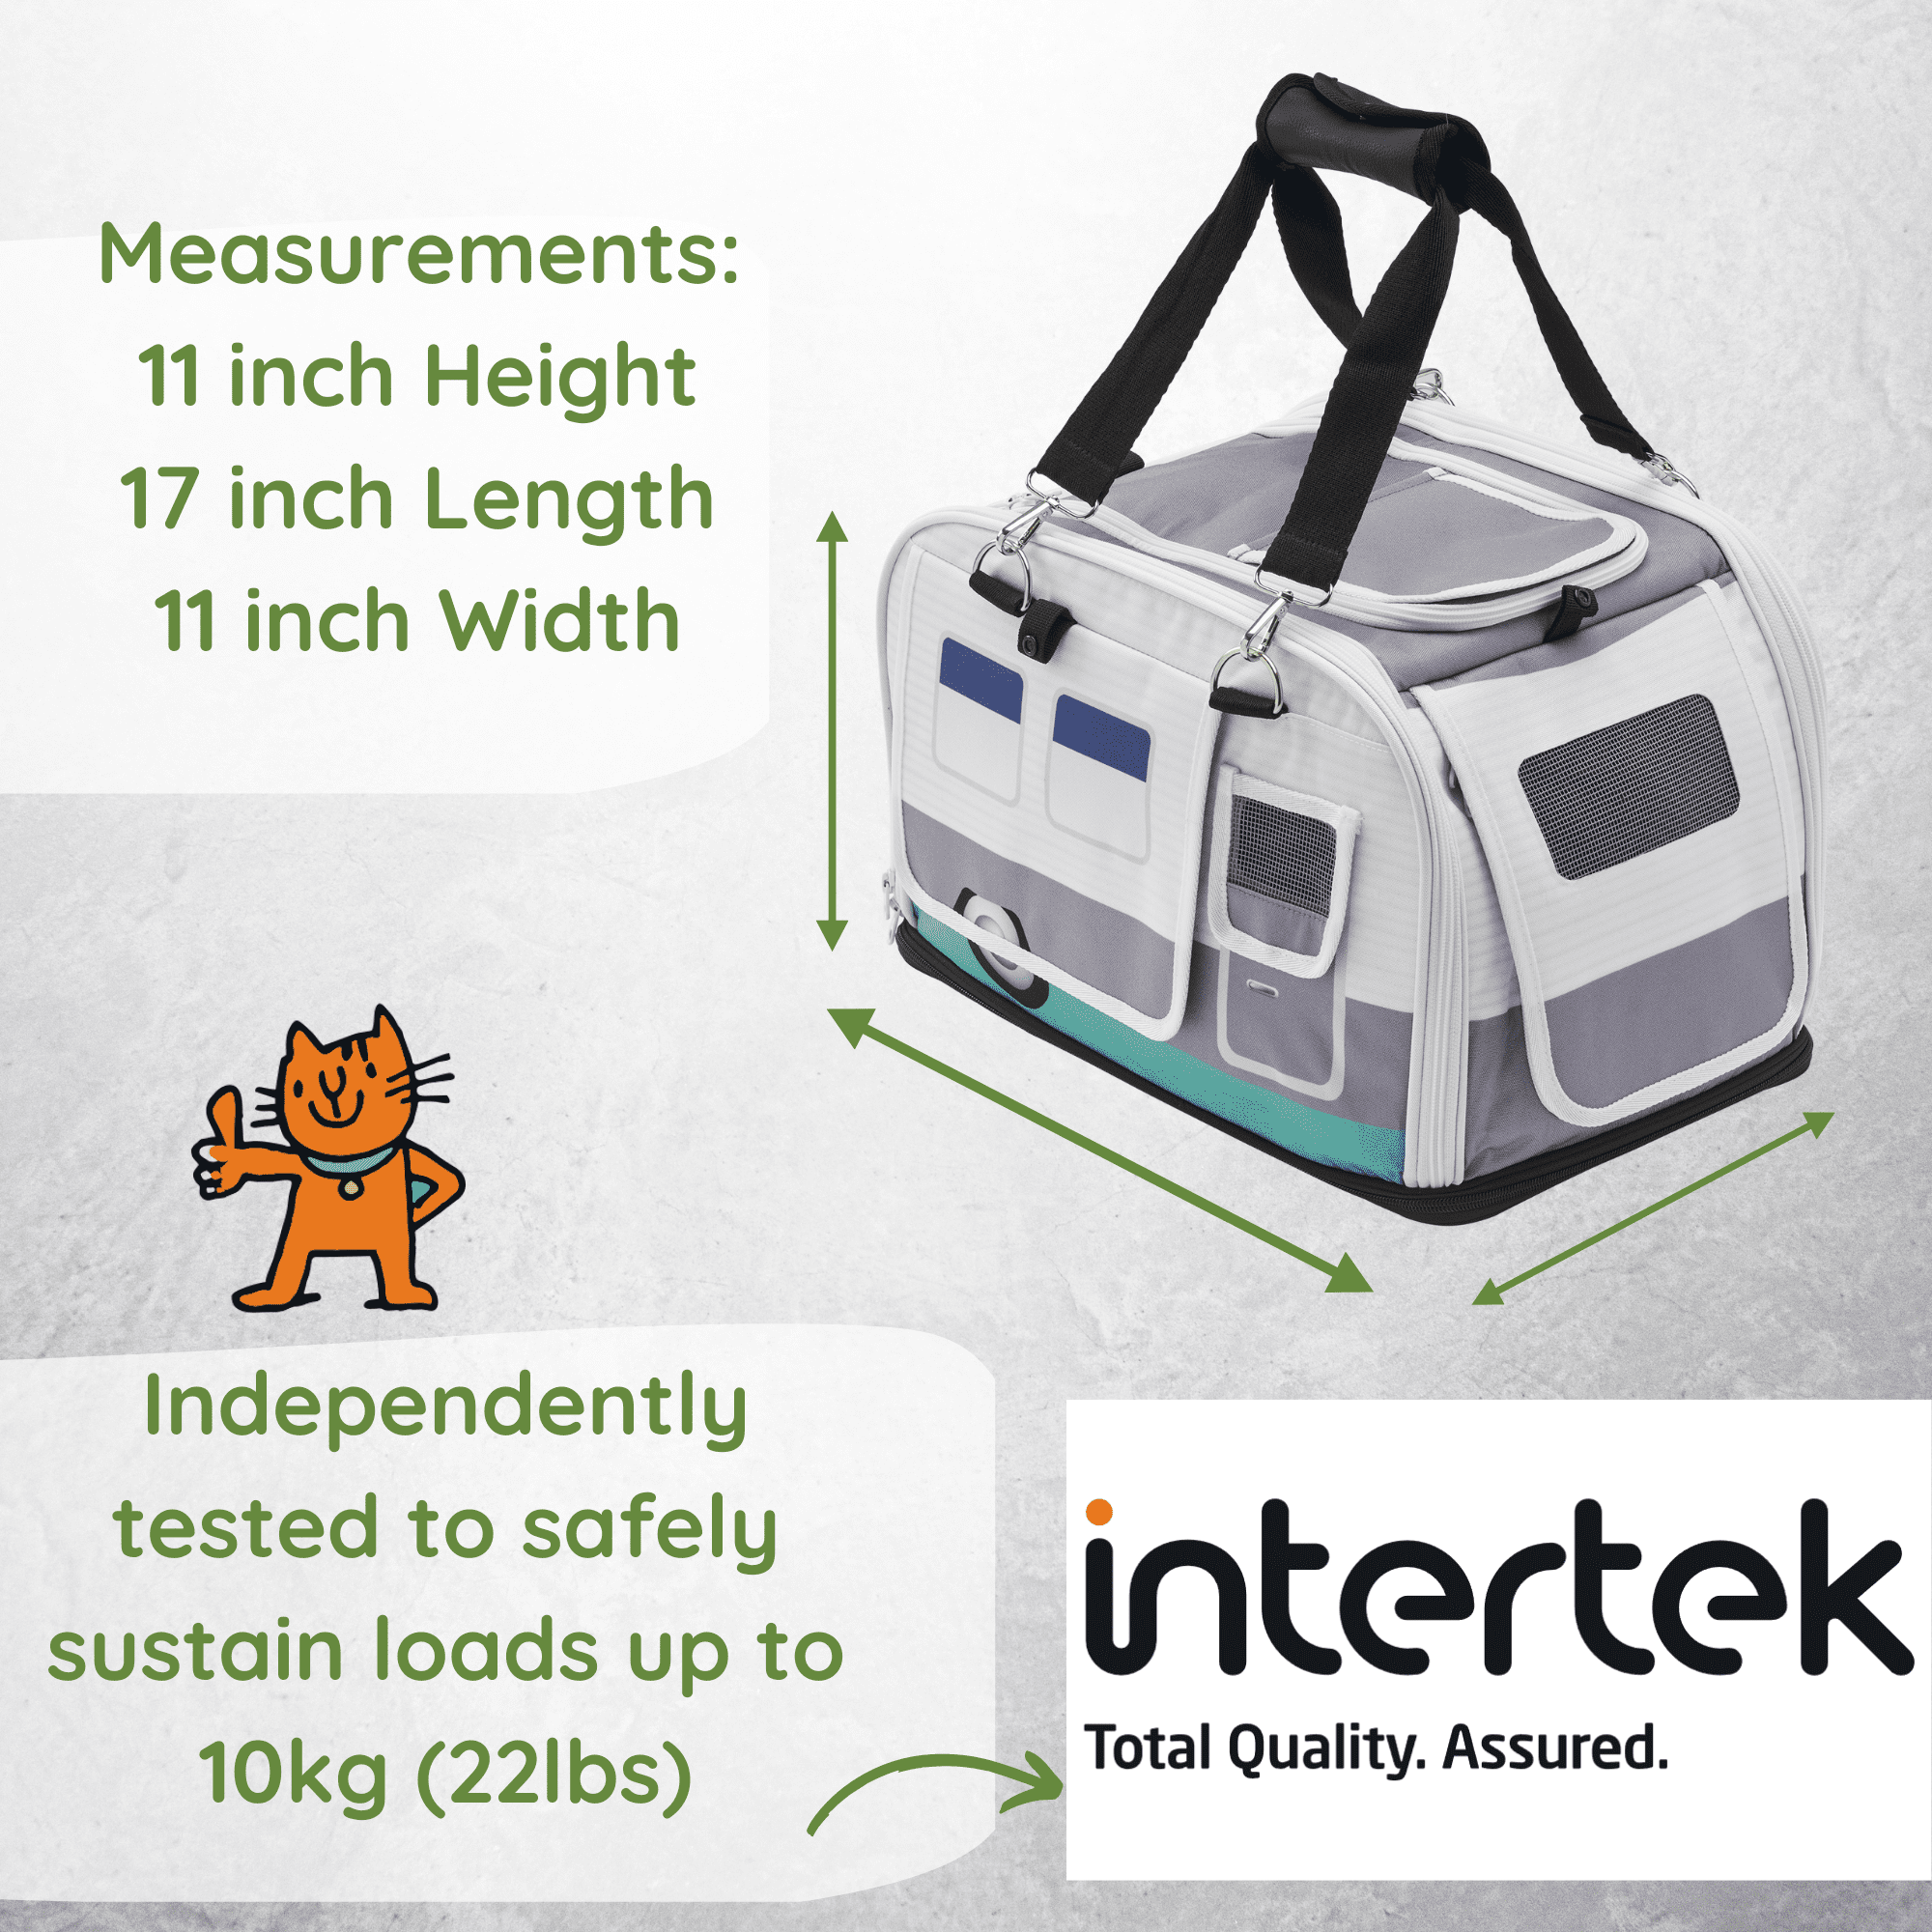 New Kittyrama Slate Cruiser 2 in 1 Cat Carrier & Hideaway. Vet Recommended  for Cat Comfort On The Go. Airline Capable. Top, Side and Front Opening Cat